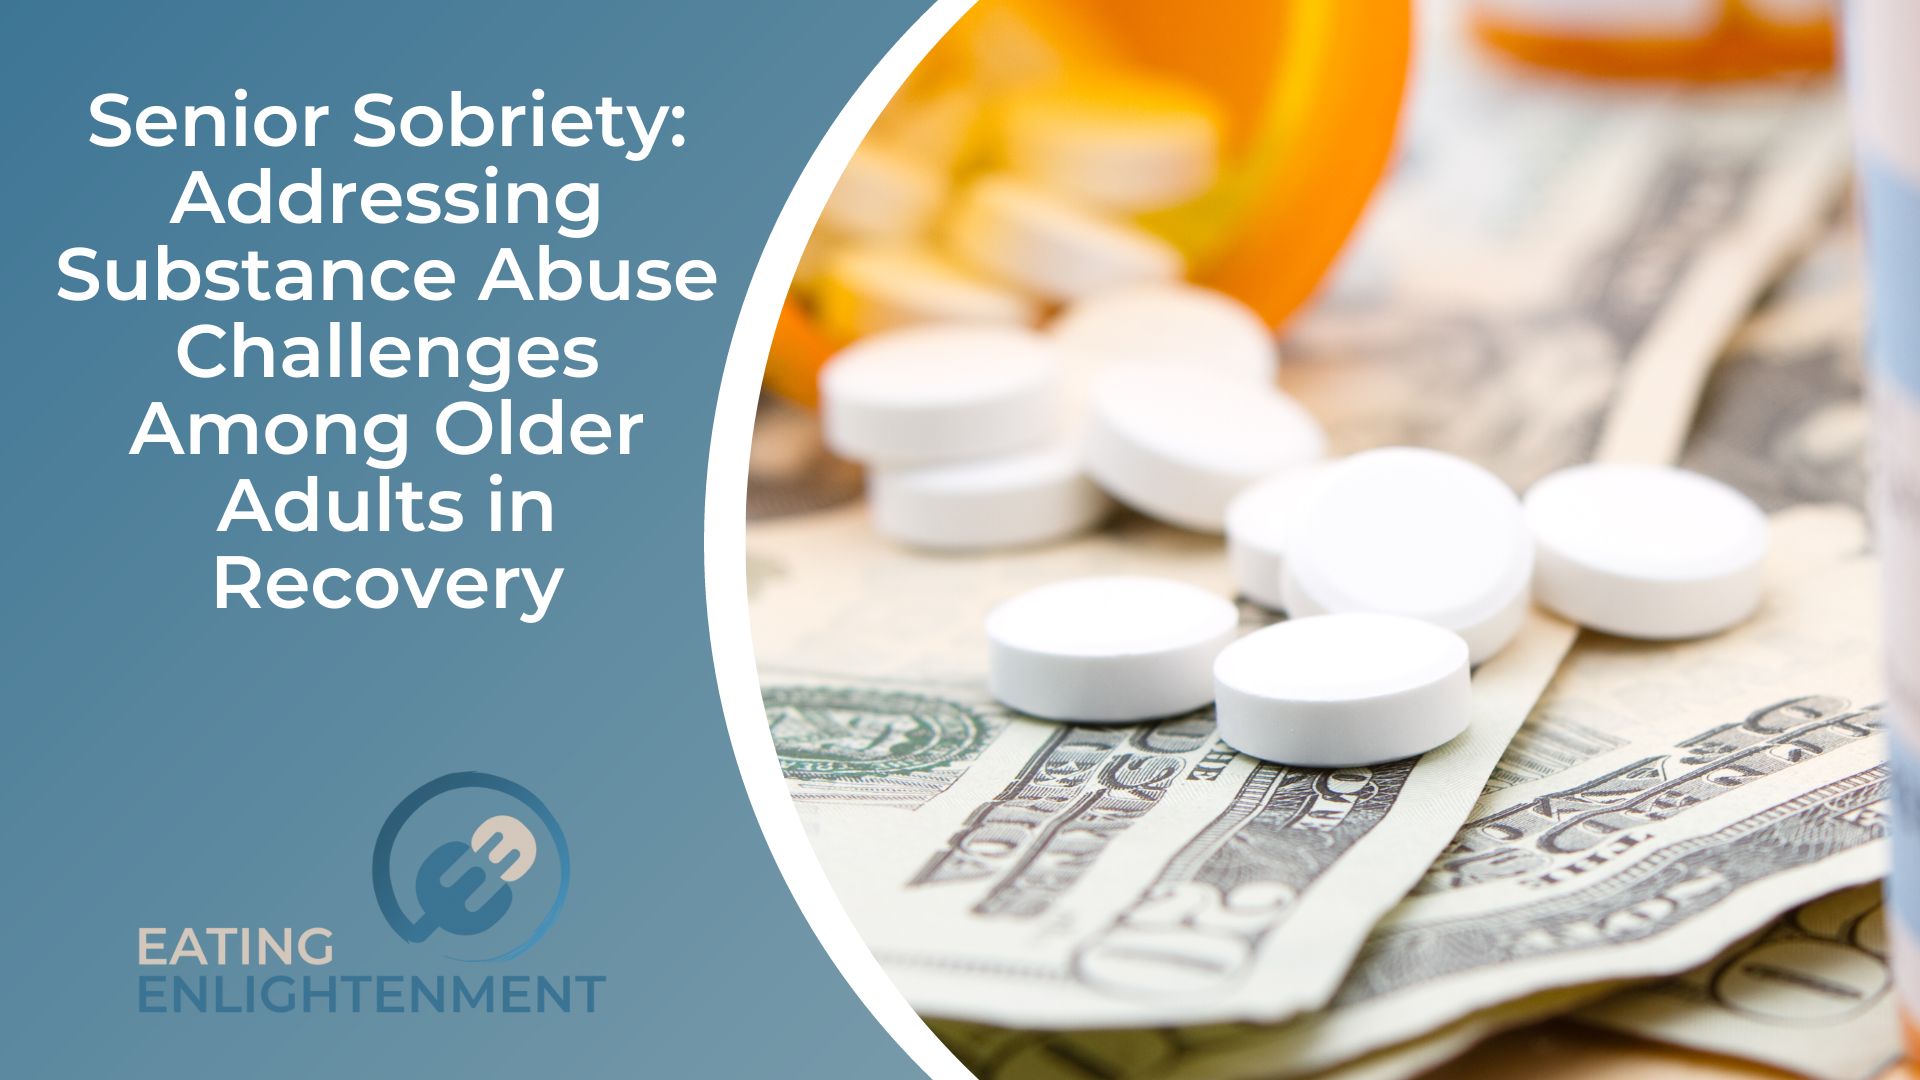 Senior Sobriety Addressing Substance Abuse Challenges Among Older Adults in Recovery